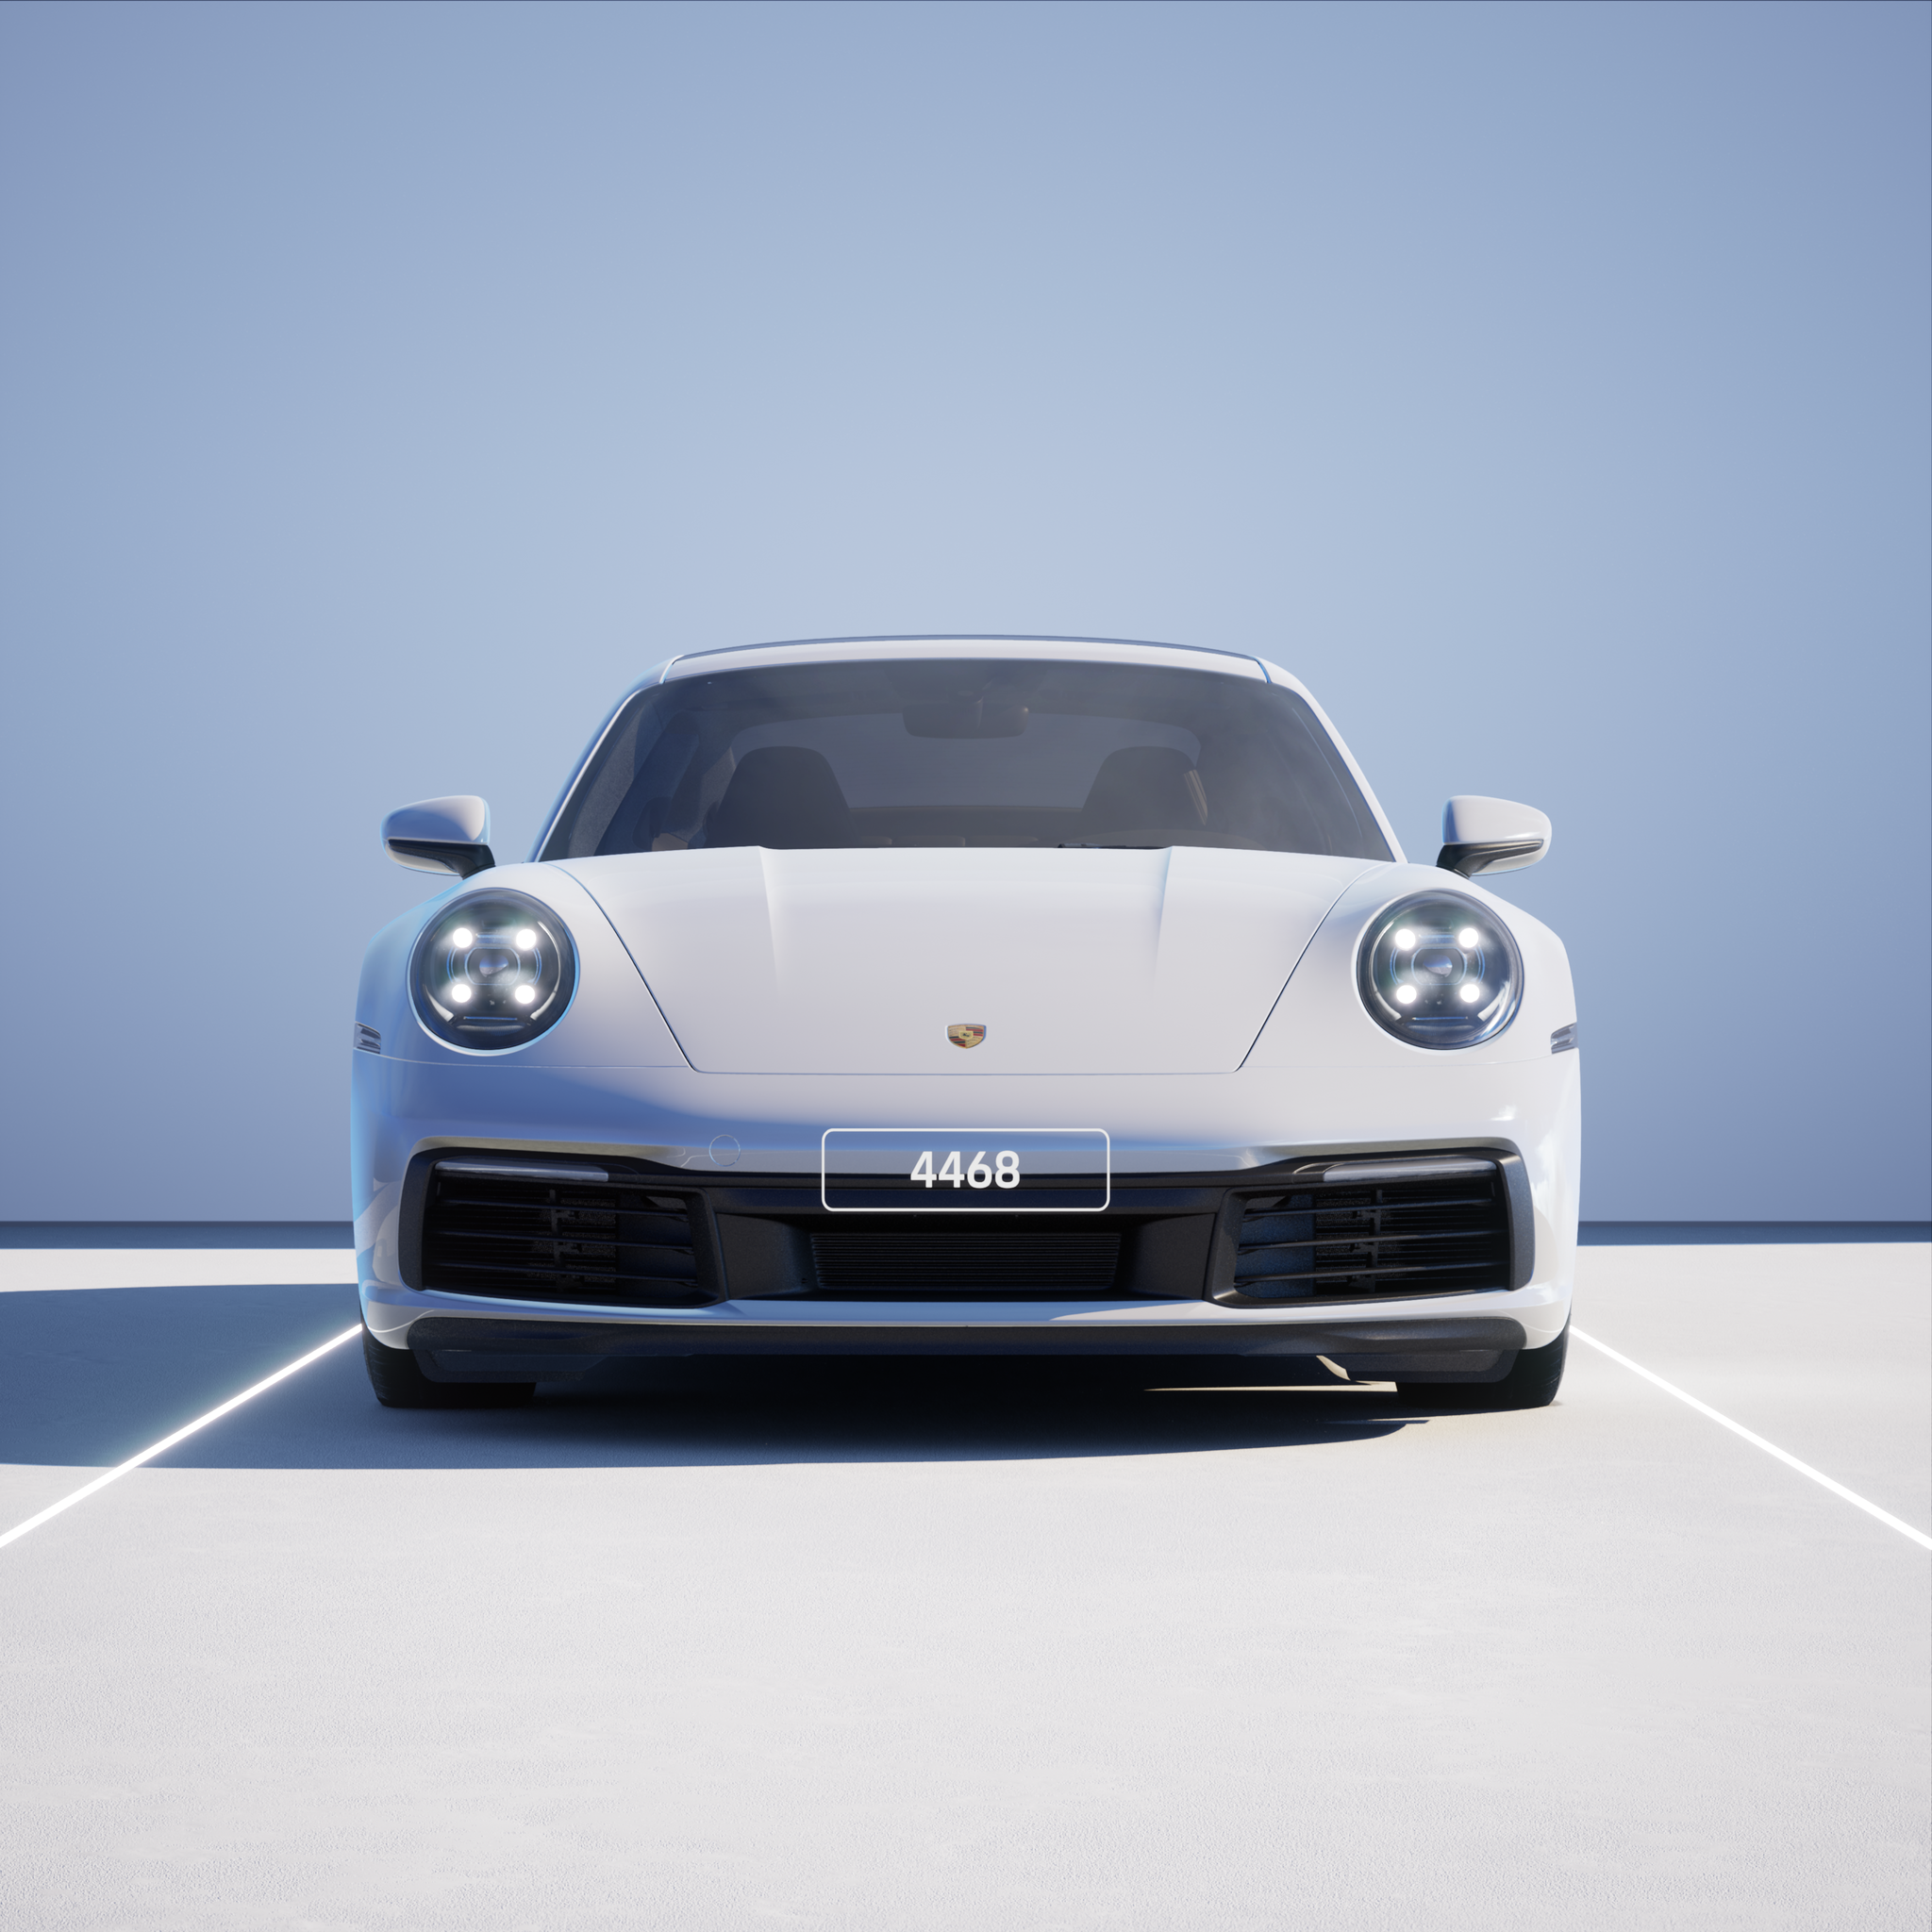 The PORSCHΞ 911 4468 image in phase